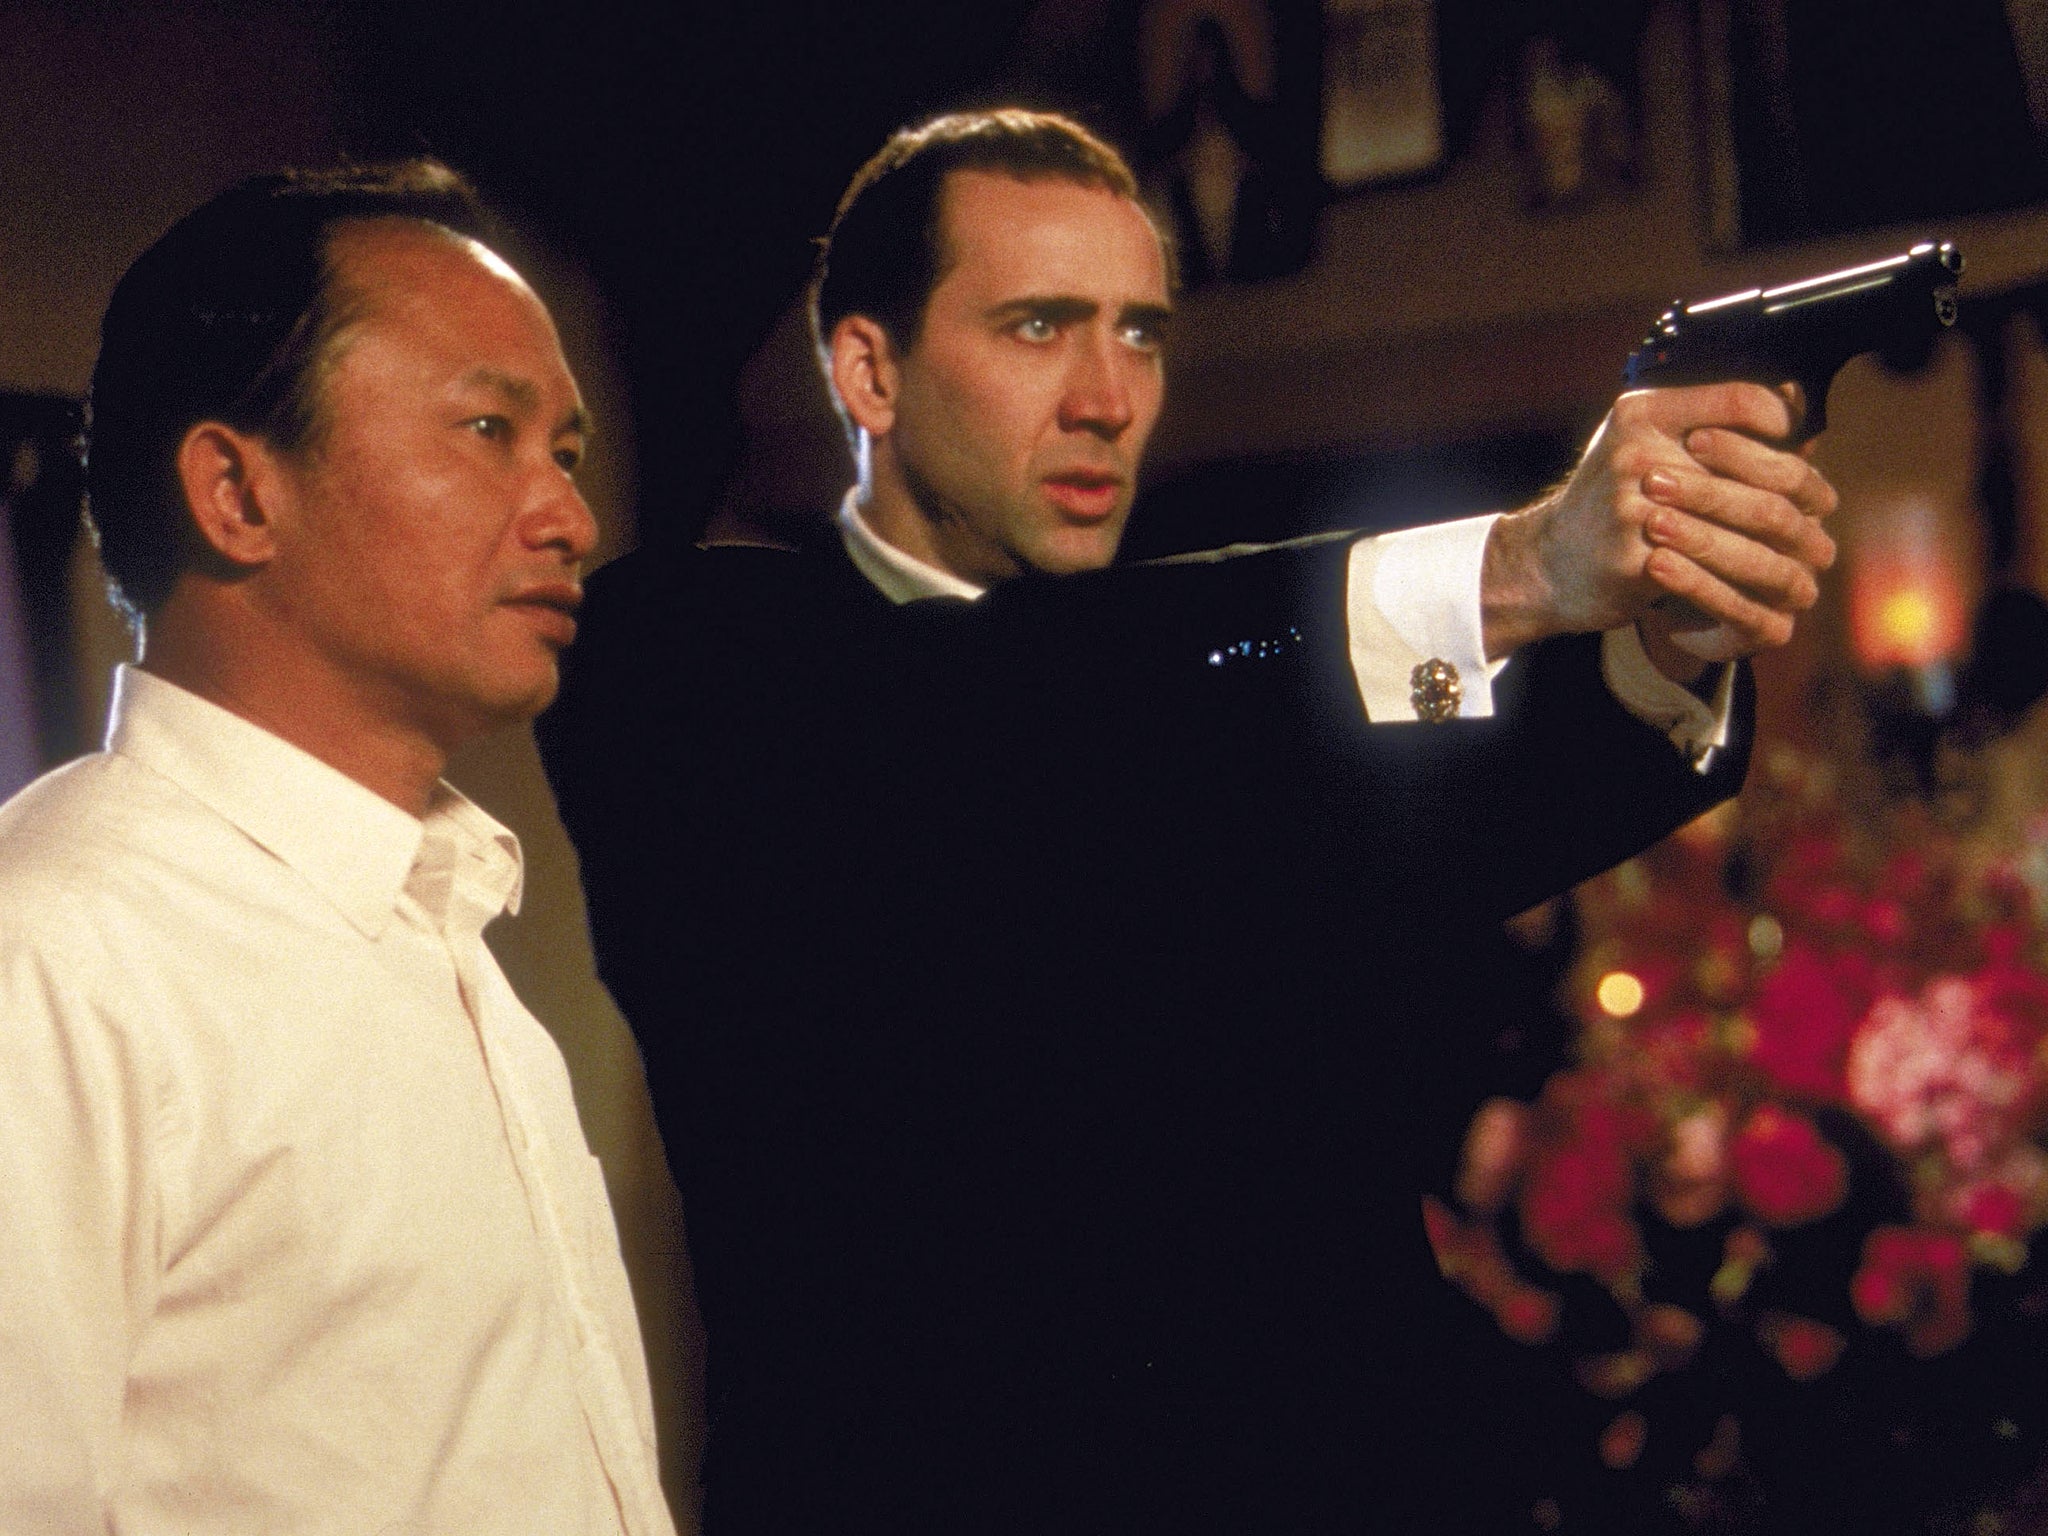 John Woo directs Nicolas Cage on the ‘Face/Off’ set